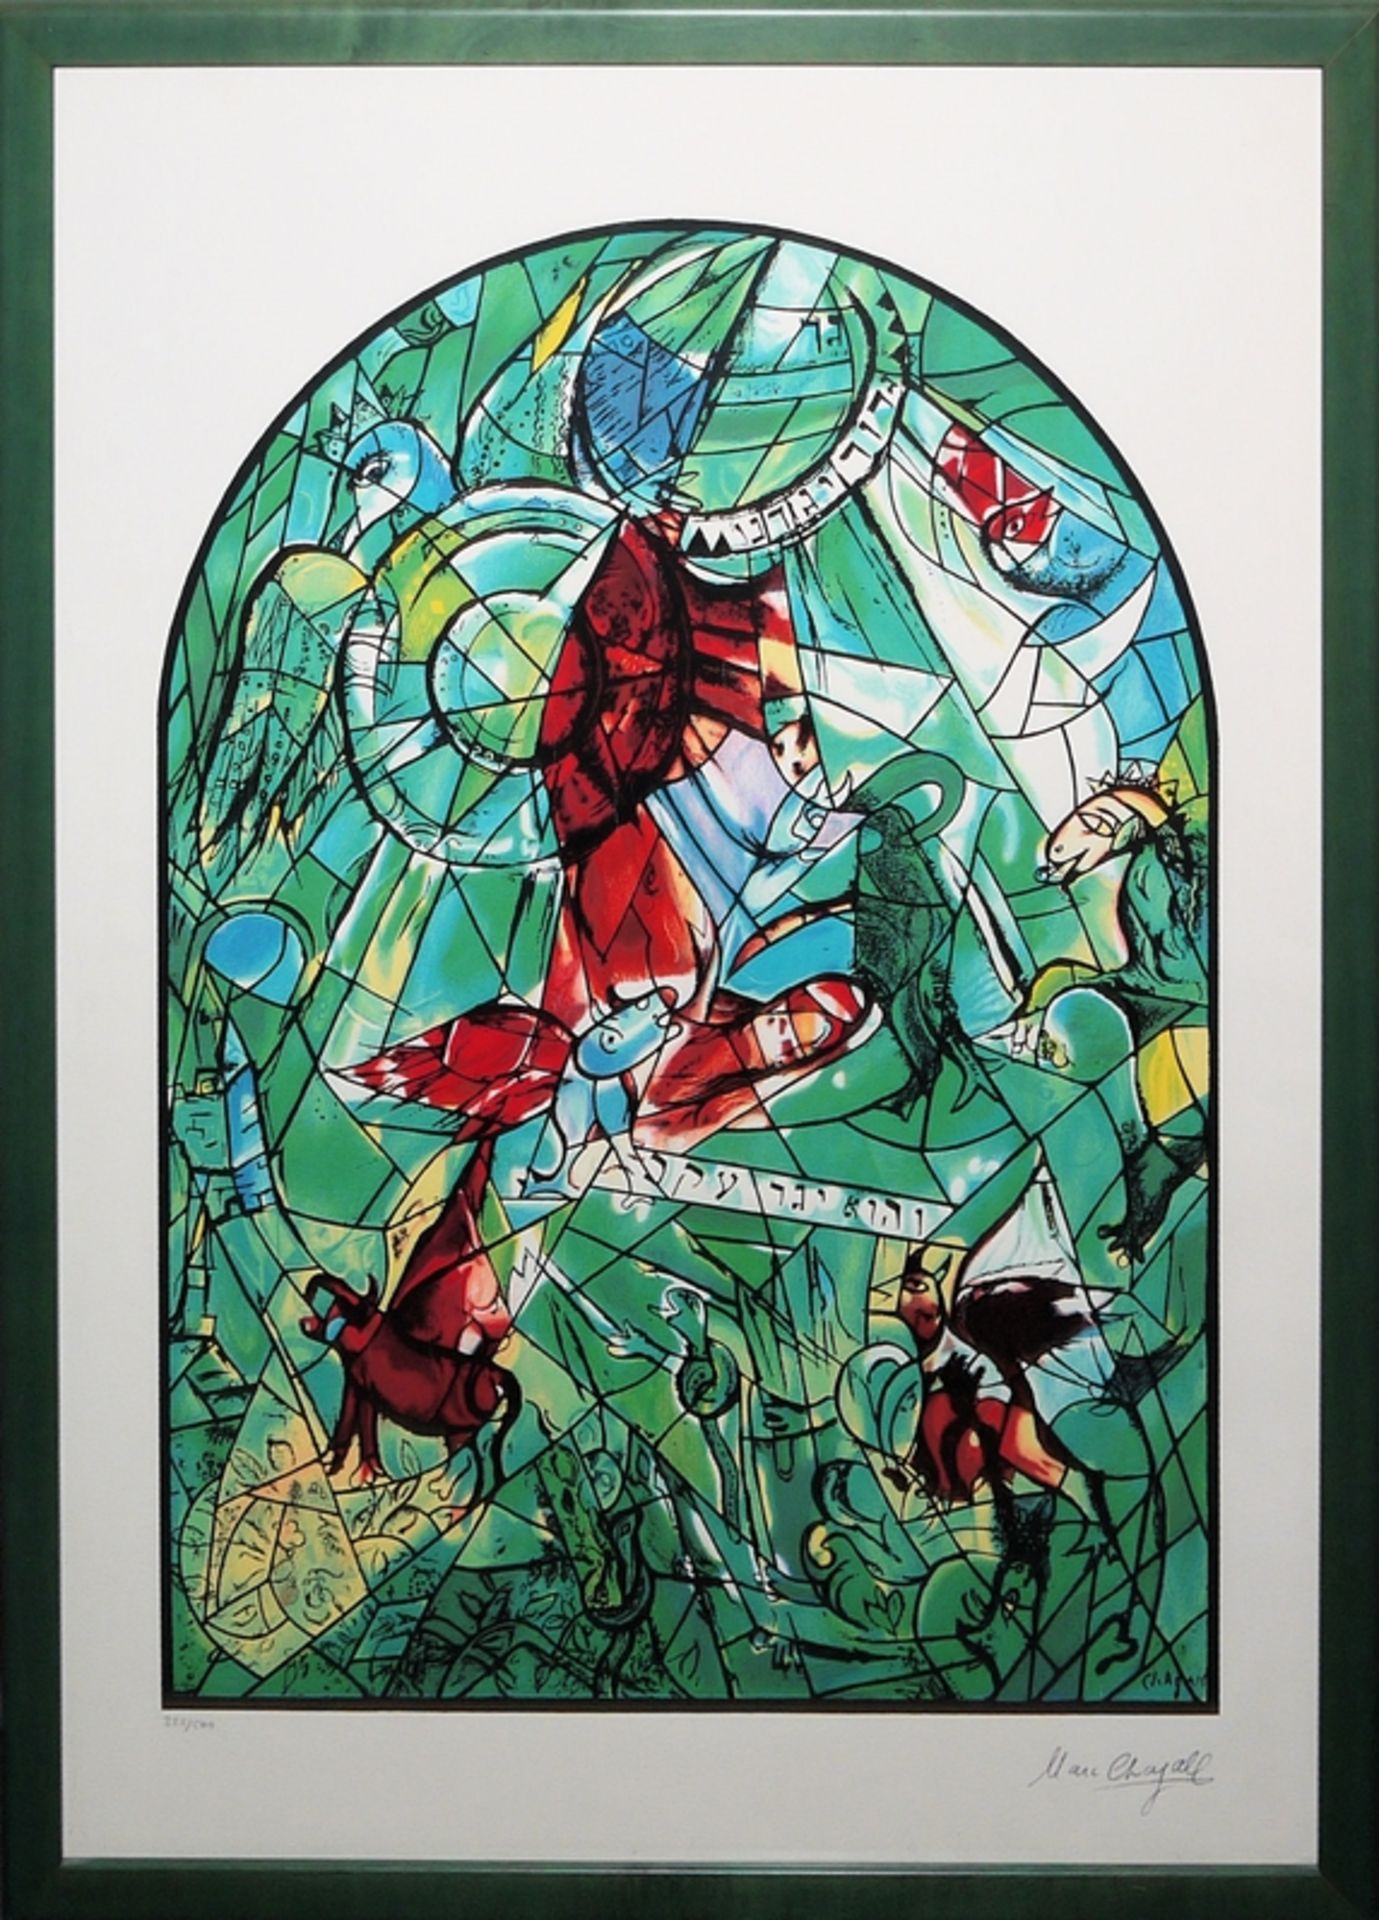 Marc Chagall, "Le Joueur de Flute", granolithograph from 1991 after original from 1955 and "Der Sta - Image 2 of 2